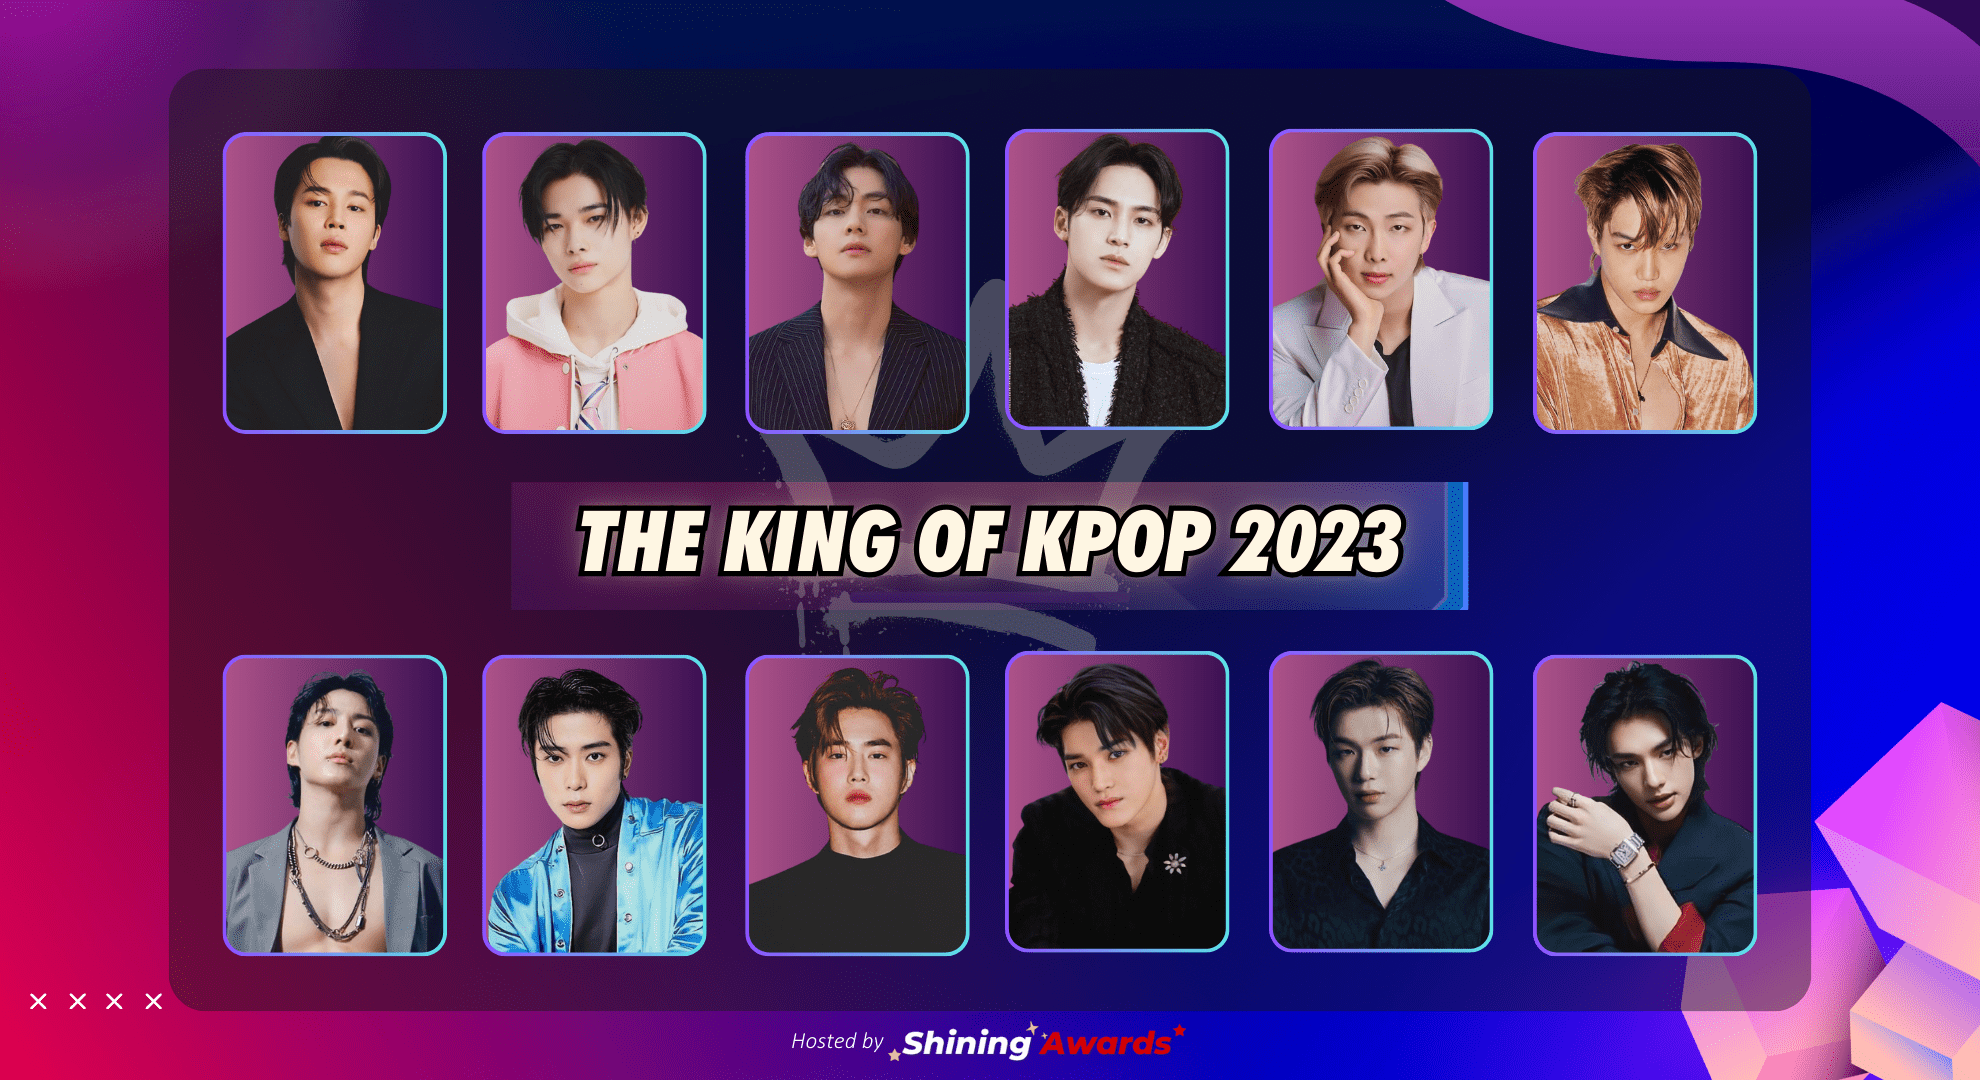 The King of Kpop 2023